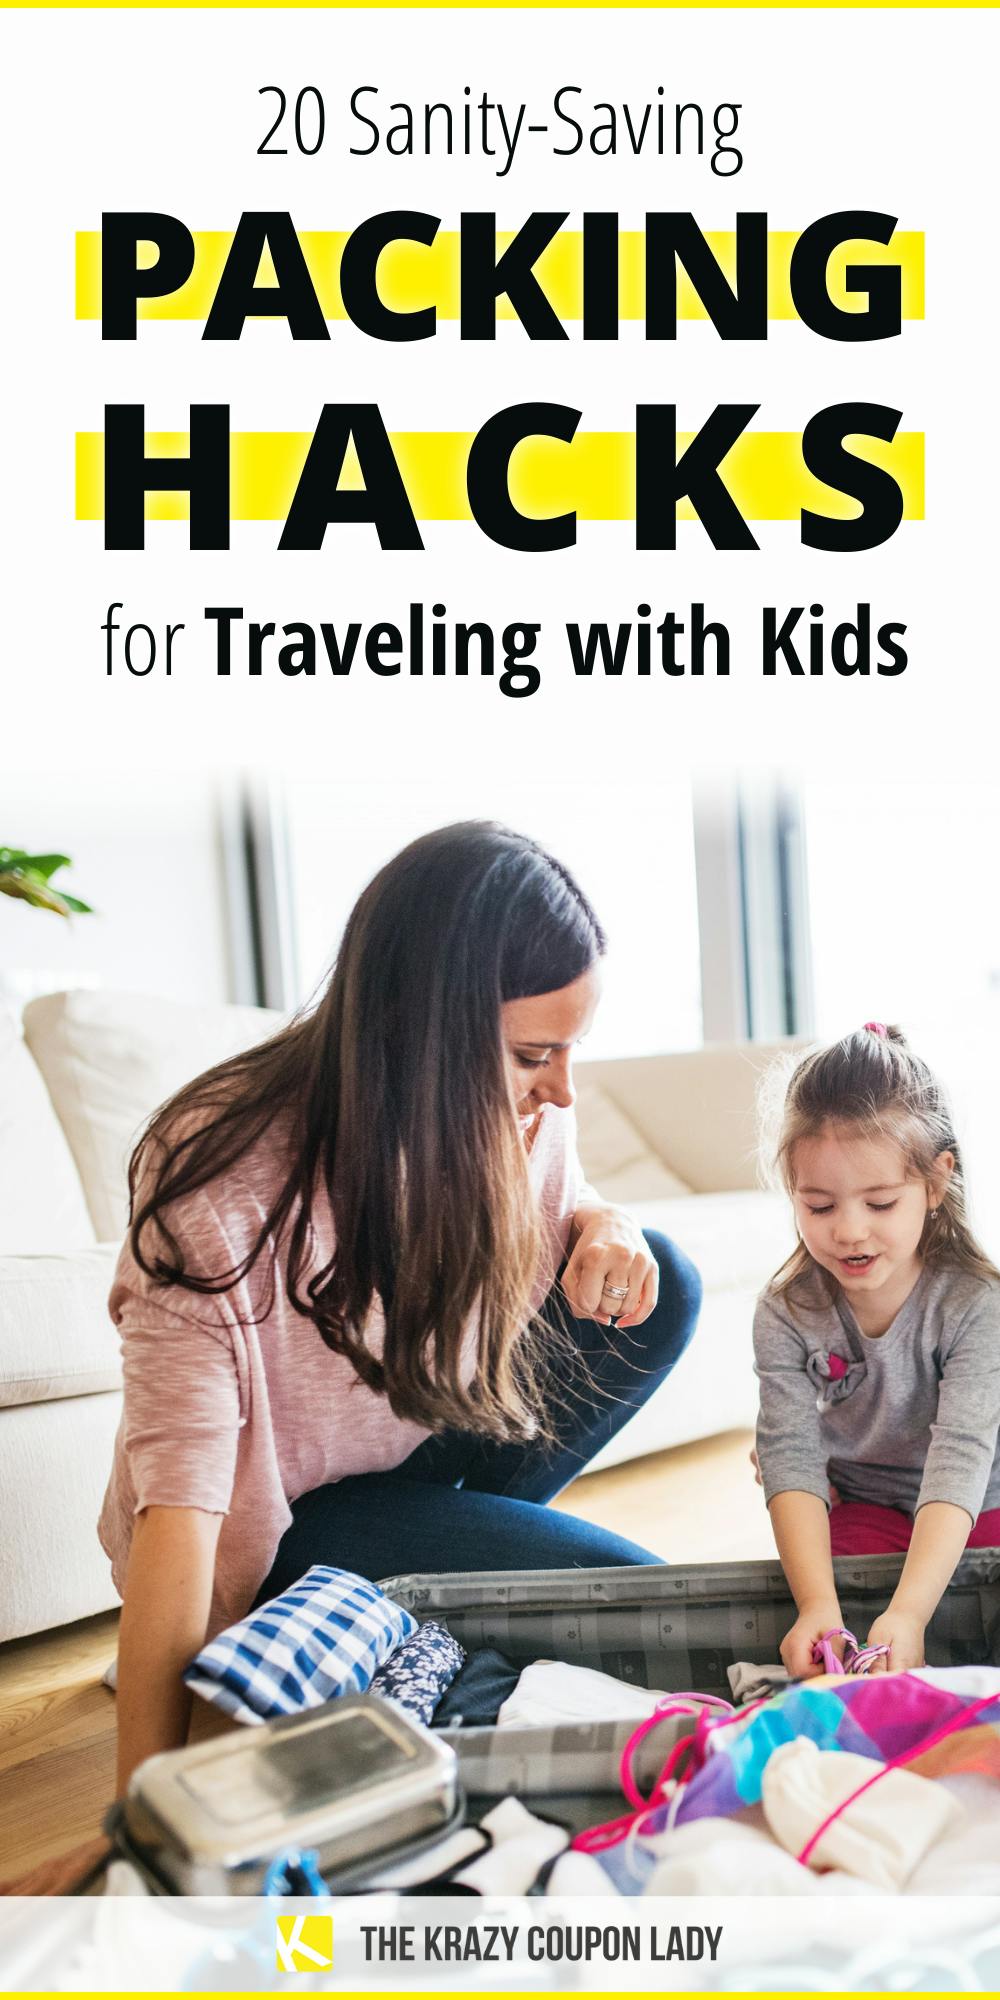 20 Sanity-Saving Packing Hacks for Traveling With Kids